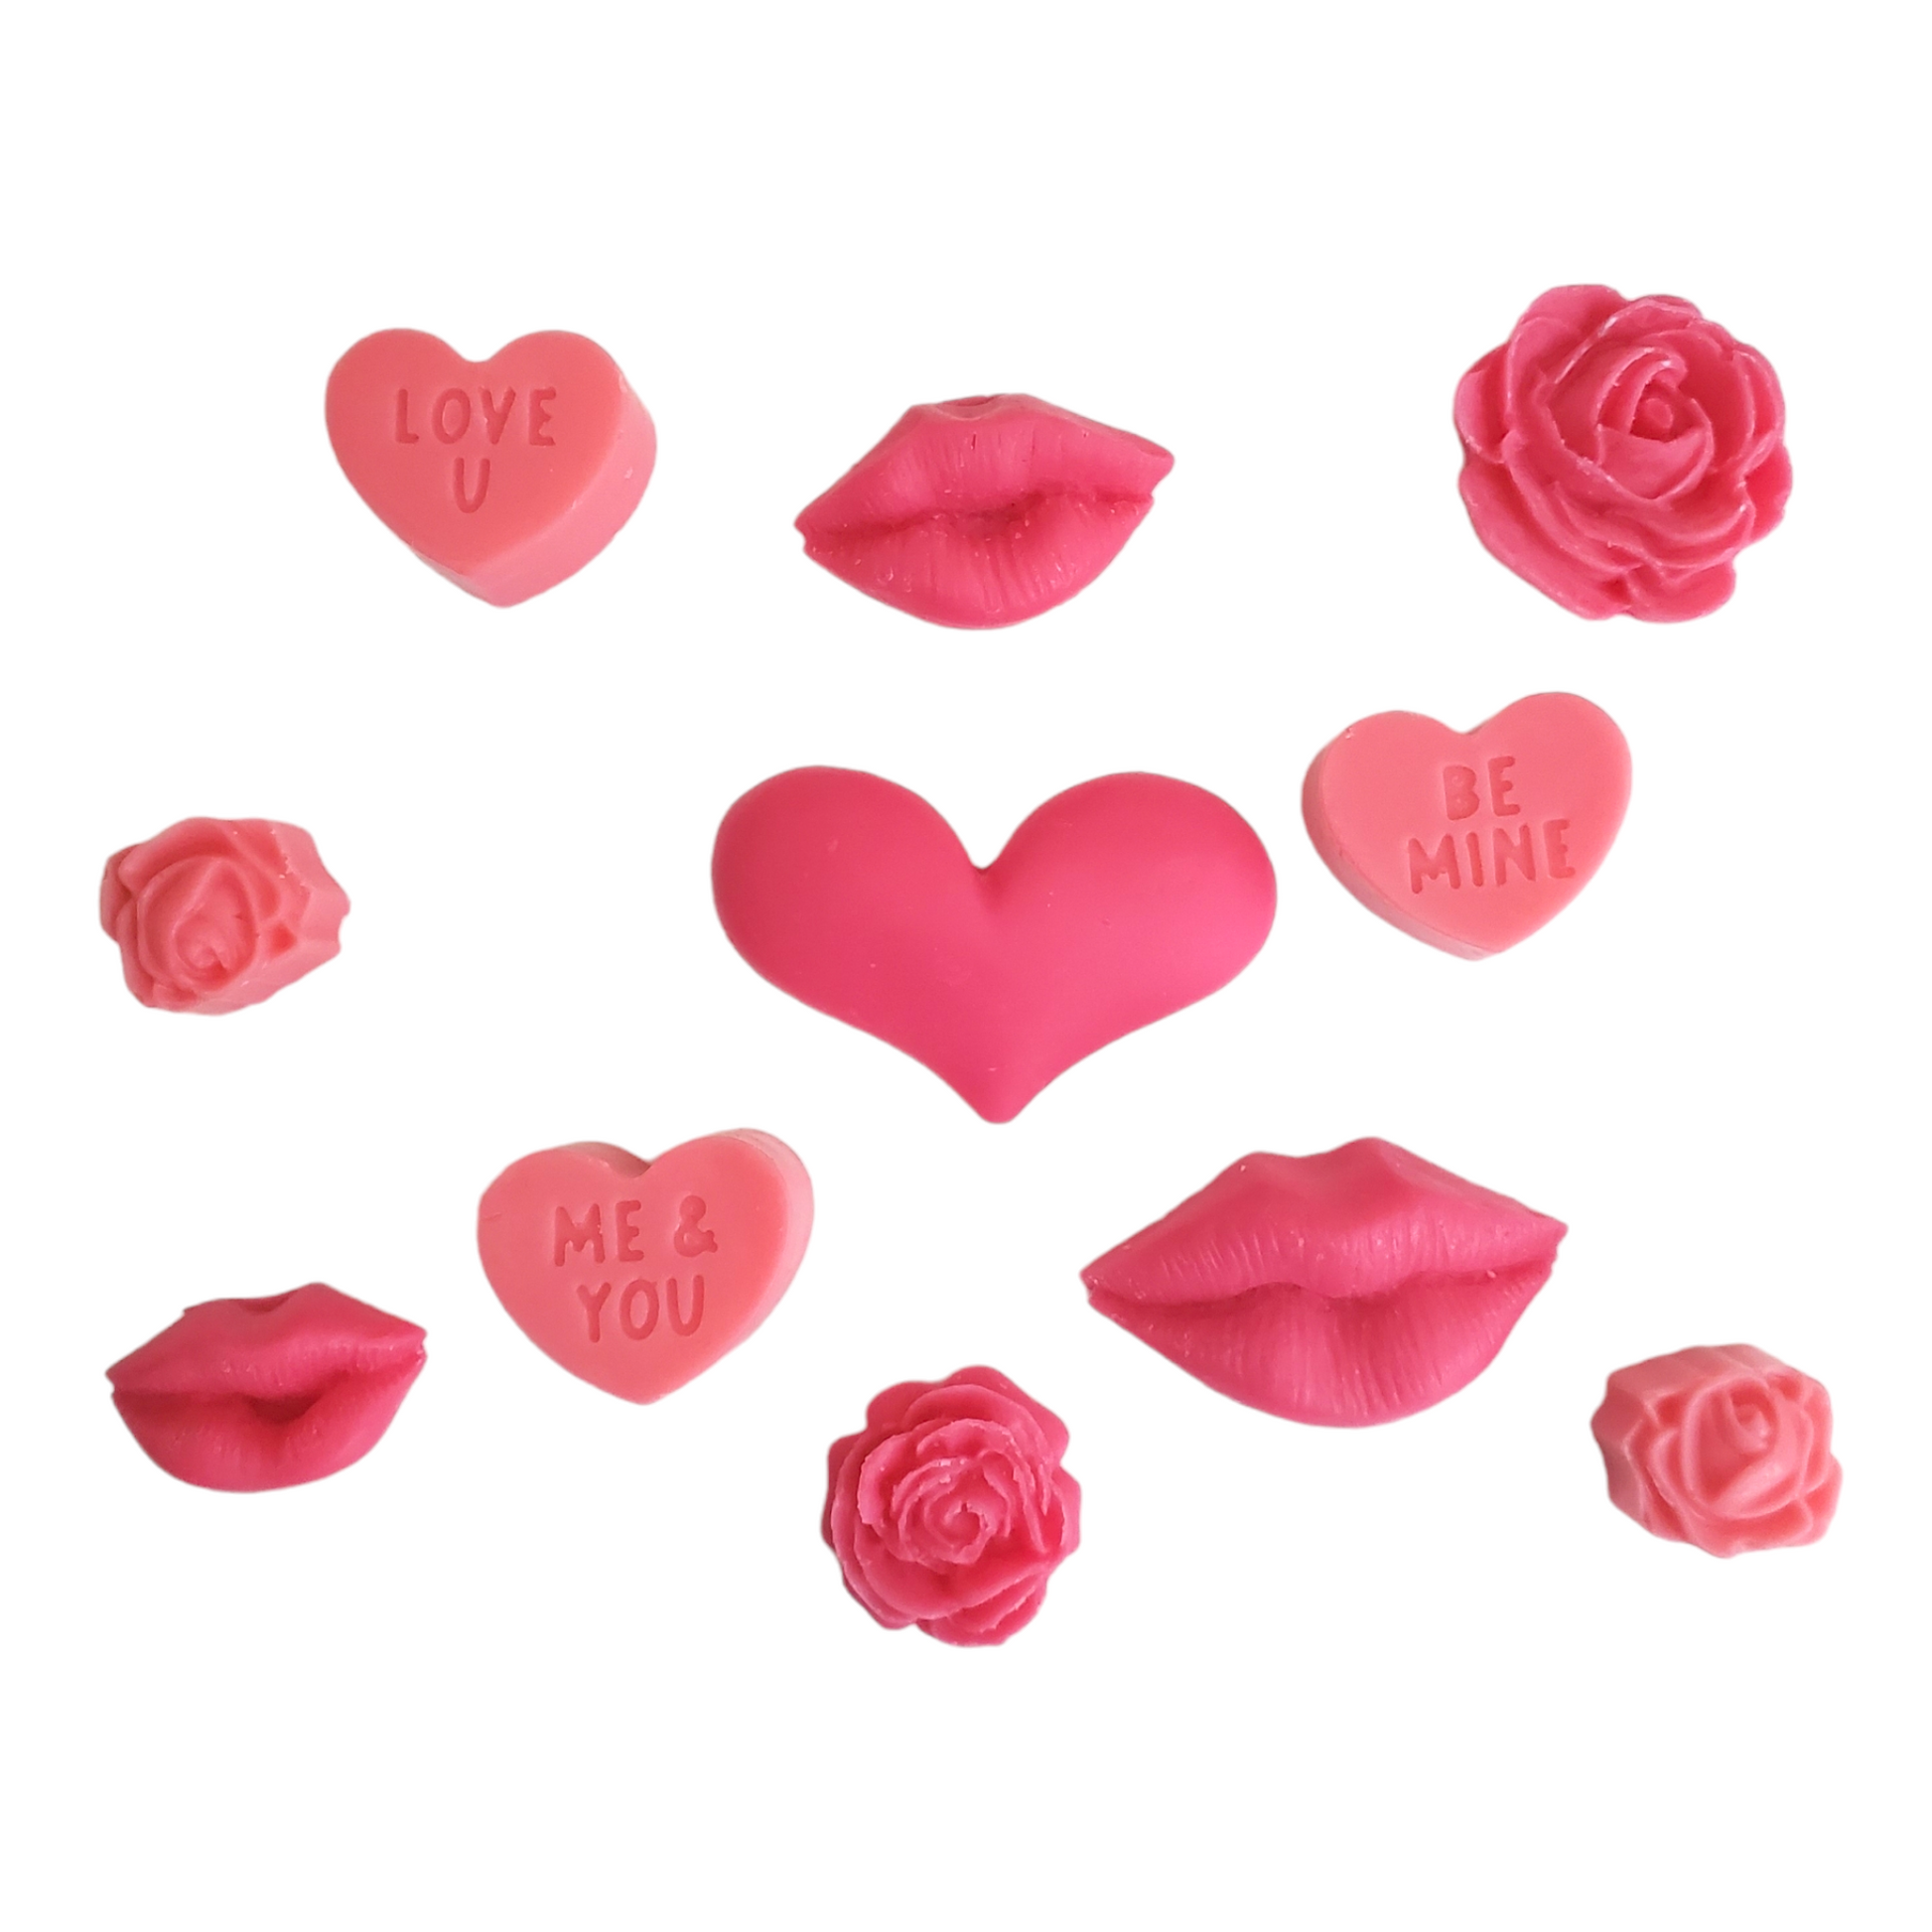 Love package soy wax melts include lips, roses, and hearts